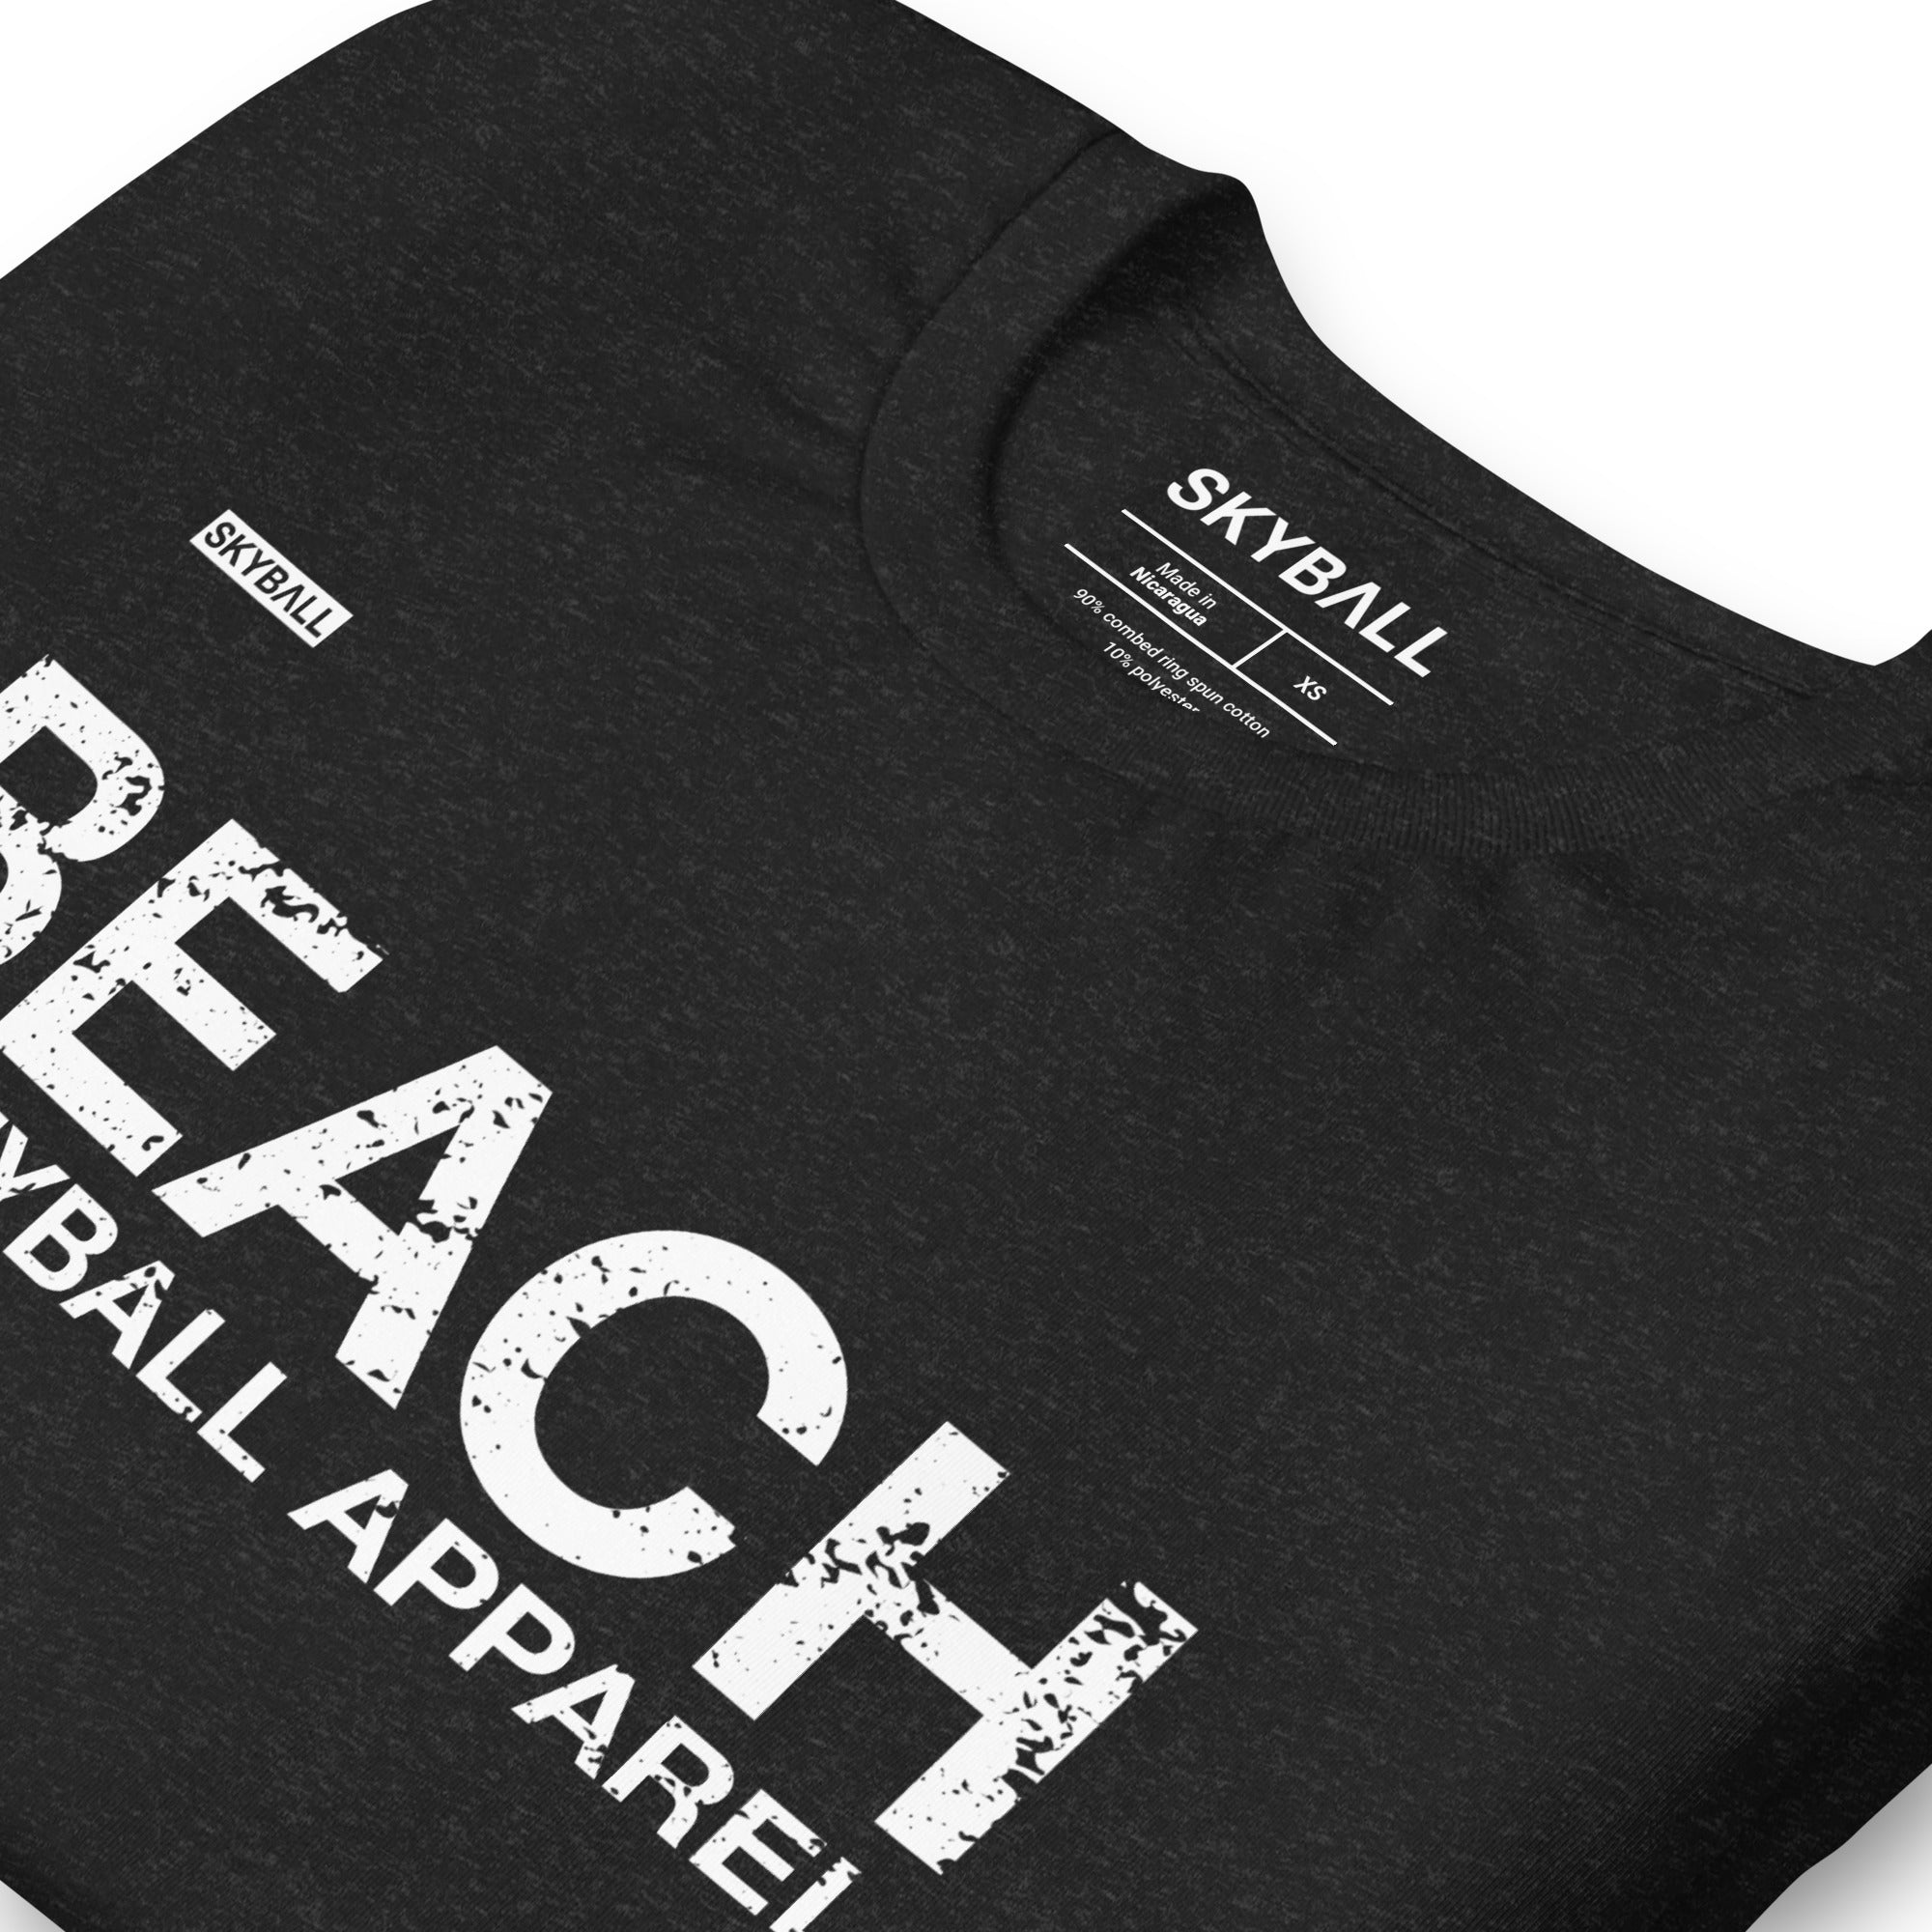 Skyball Beach Volleyball Apparel - Distressed T-Shirt